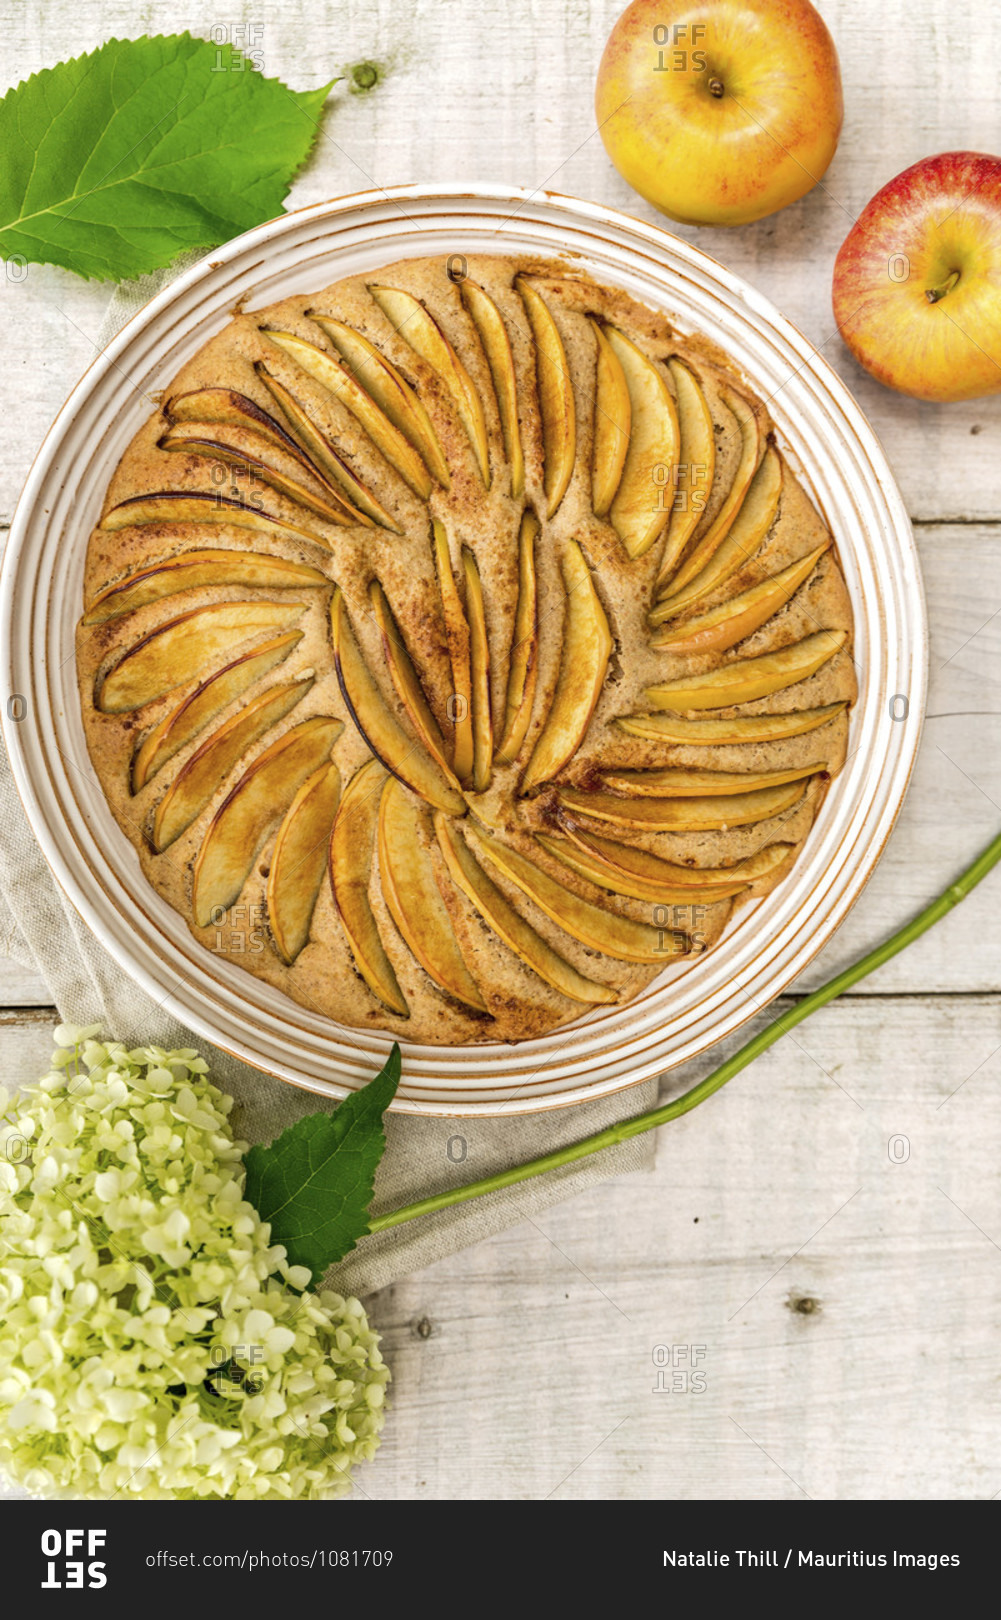 Apple pie baked in a round shape and decorated with apple slices, decorated with two apples and a white hydrangea flower